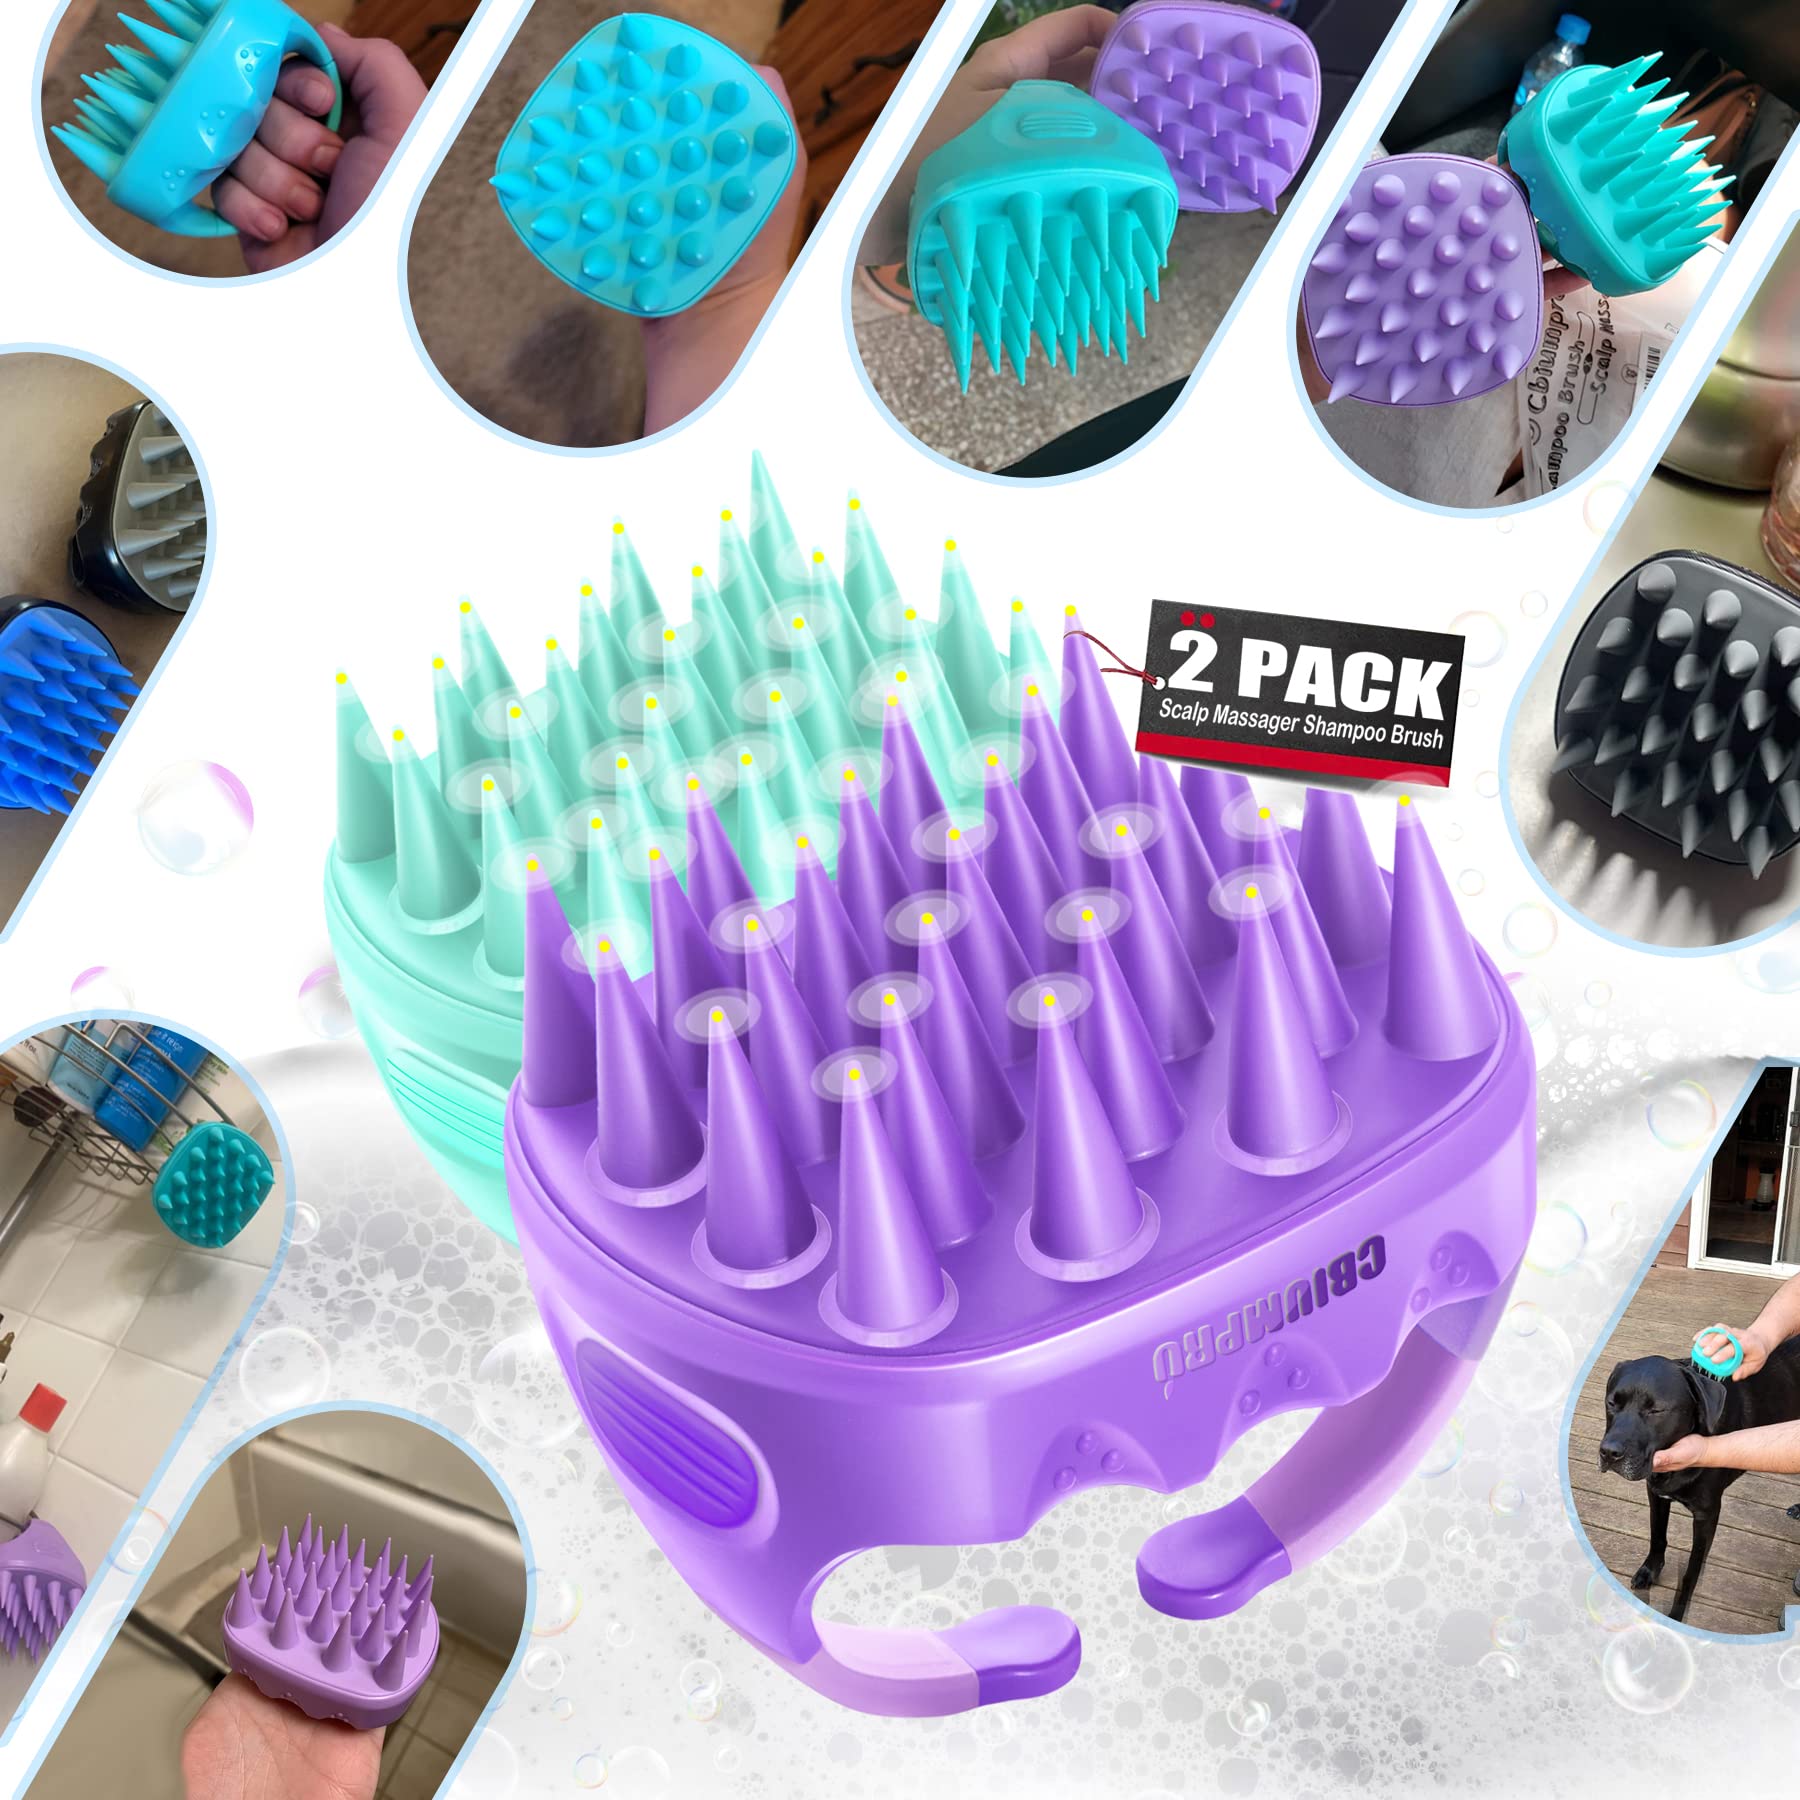 Scalp Massager Shampoo Brush, 2 Pack Scalp Brush Shower for Hair Growth, Soft Silicone Scalp Exfoliator for Dandruff Removal, Scalp Care Scrubber for All Hair Types of Girls, Teens, Men, Pets